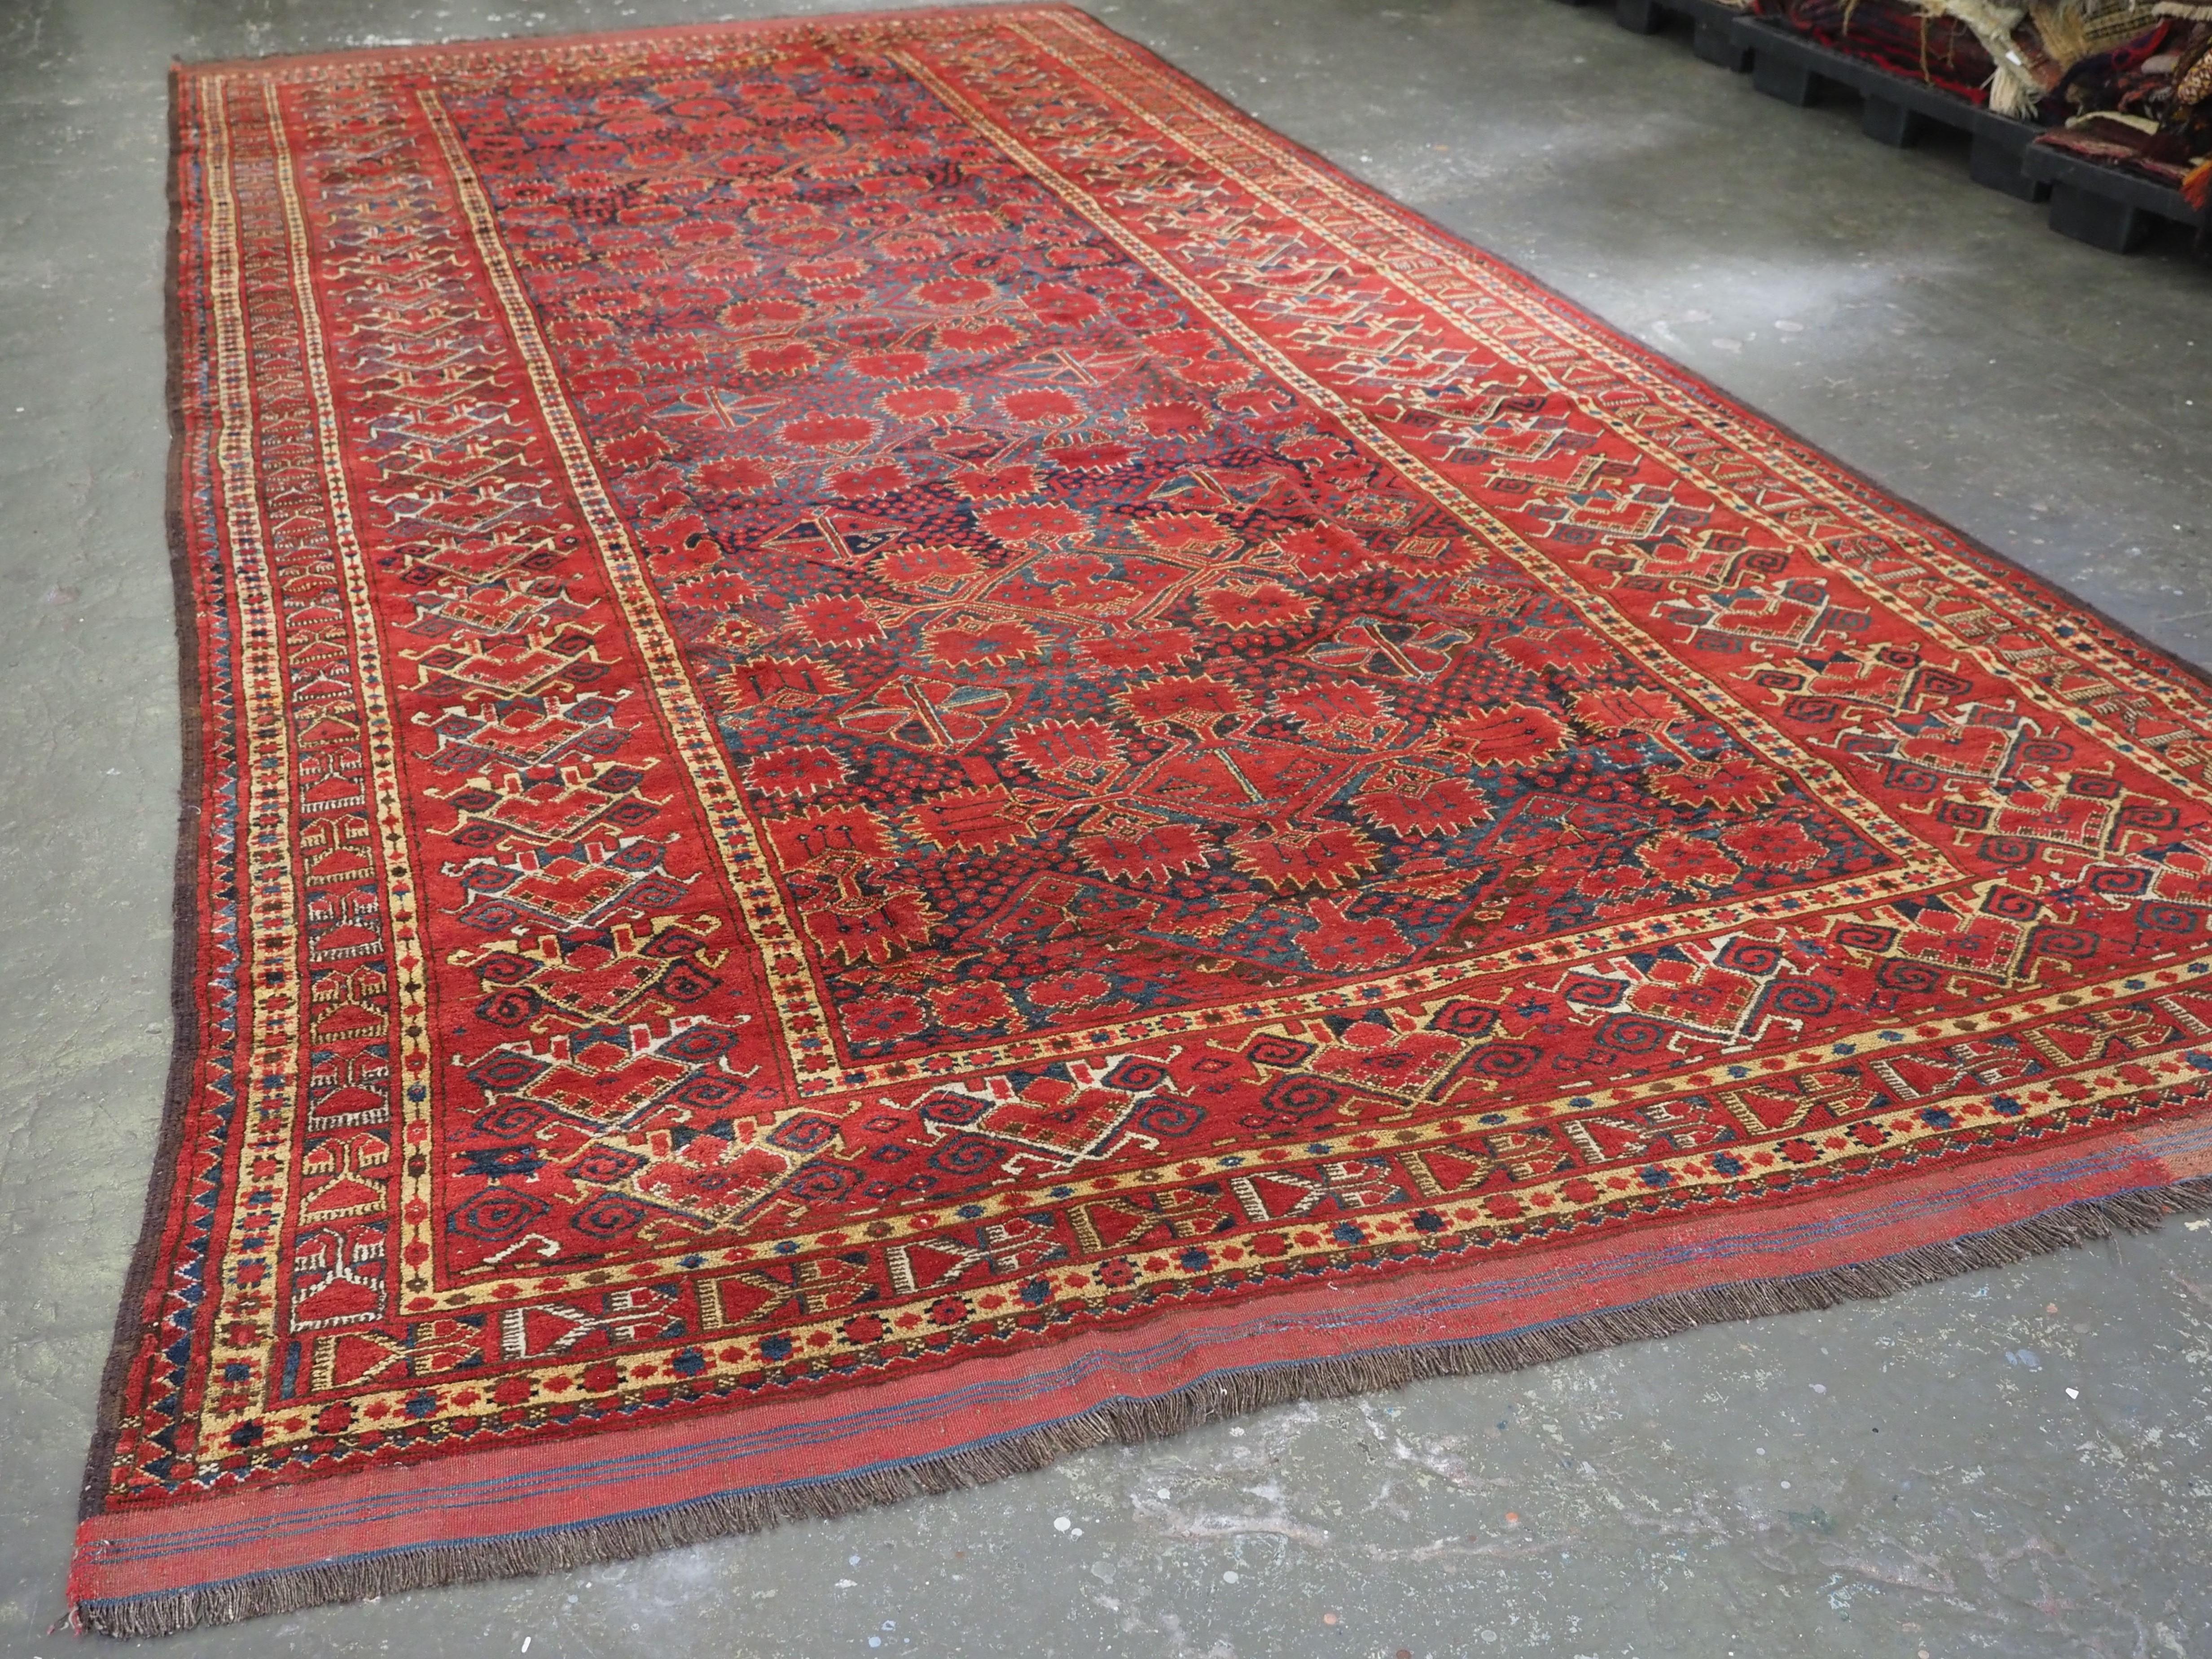 Size: 18ft 6in x 8ft 2in (565 x 250cm).

Antique Ersari Beshir Turkmen kelleh carpet of exceptional size.

Circa 1870 or earlier.

This exceptional tribal carpet originates from the border regions of norther Afghanistan. The abrashed indigo blue